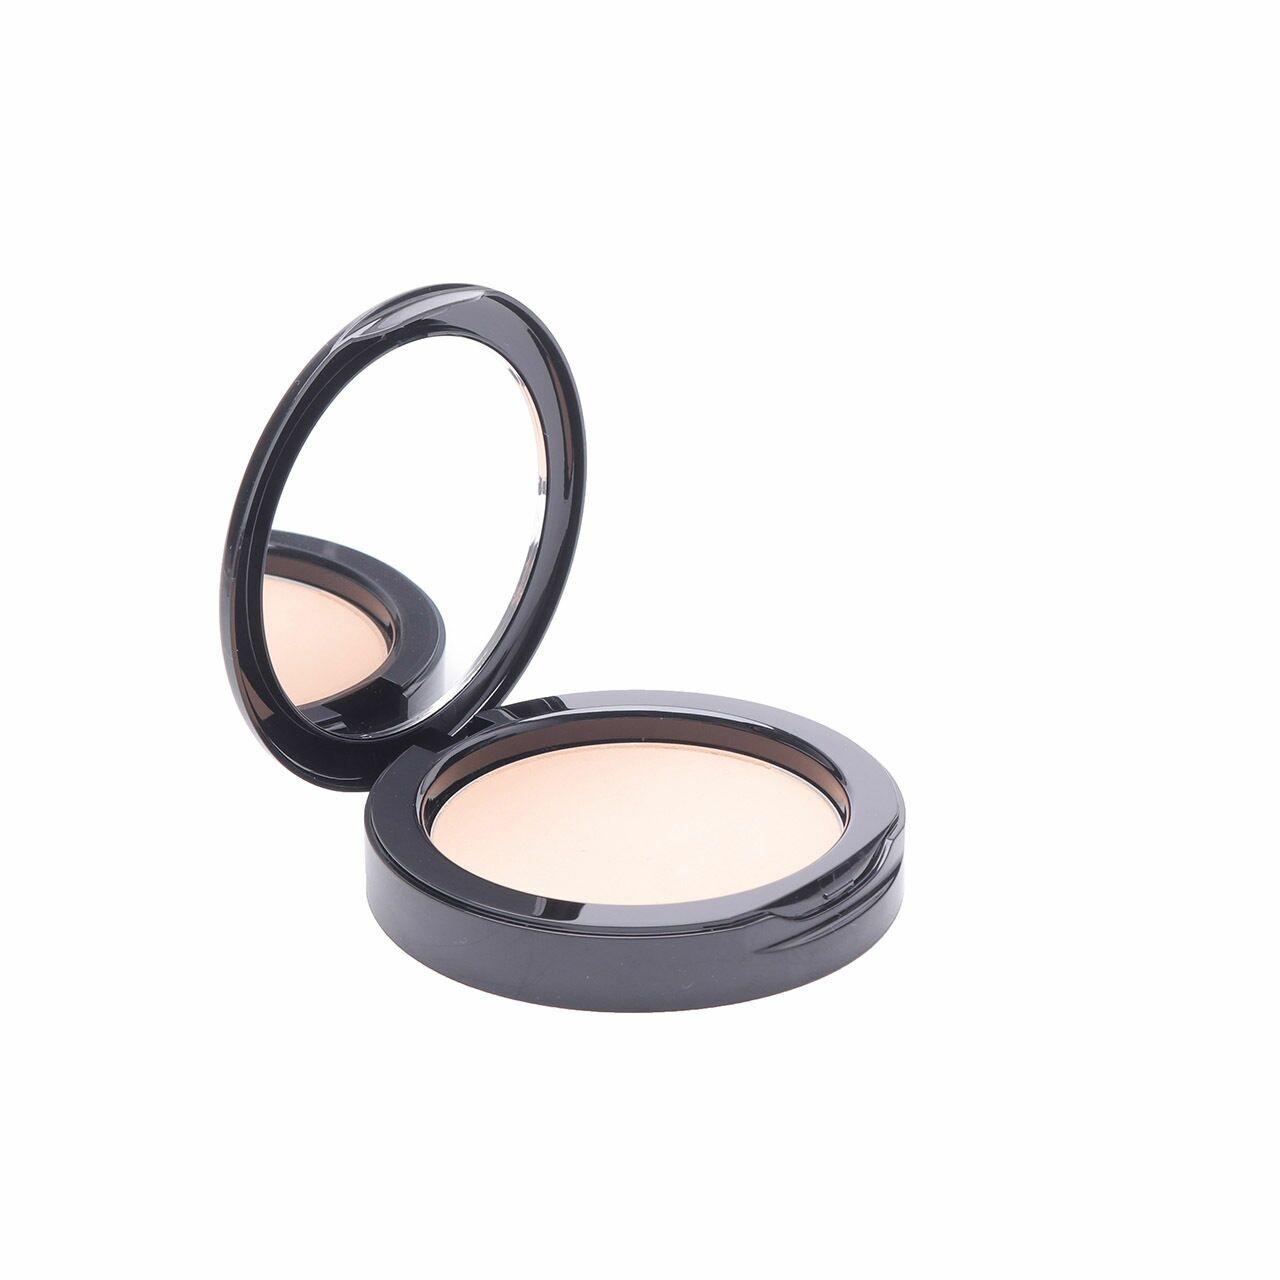 Maybelline Fit Me Matte + Poreless Powder 12H SPF 28 PA+++ Oil Control 120 Classic Ivory Faces